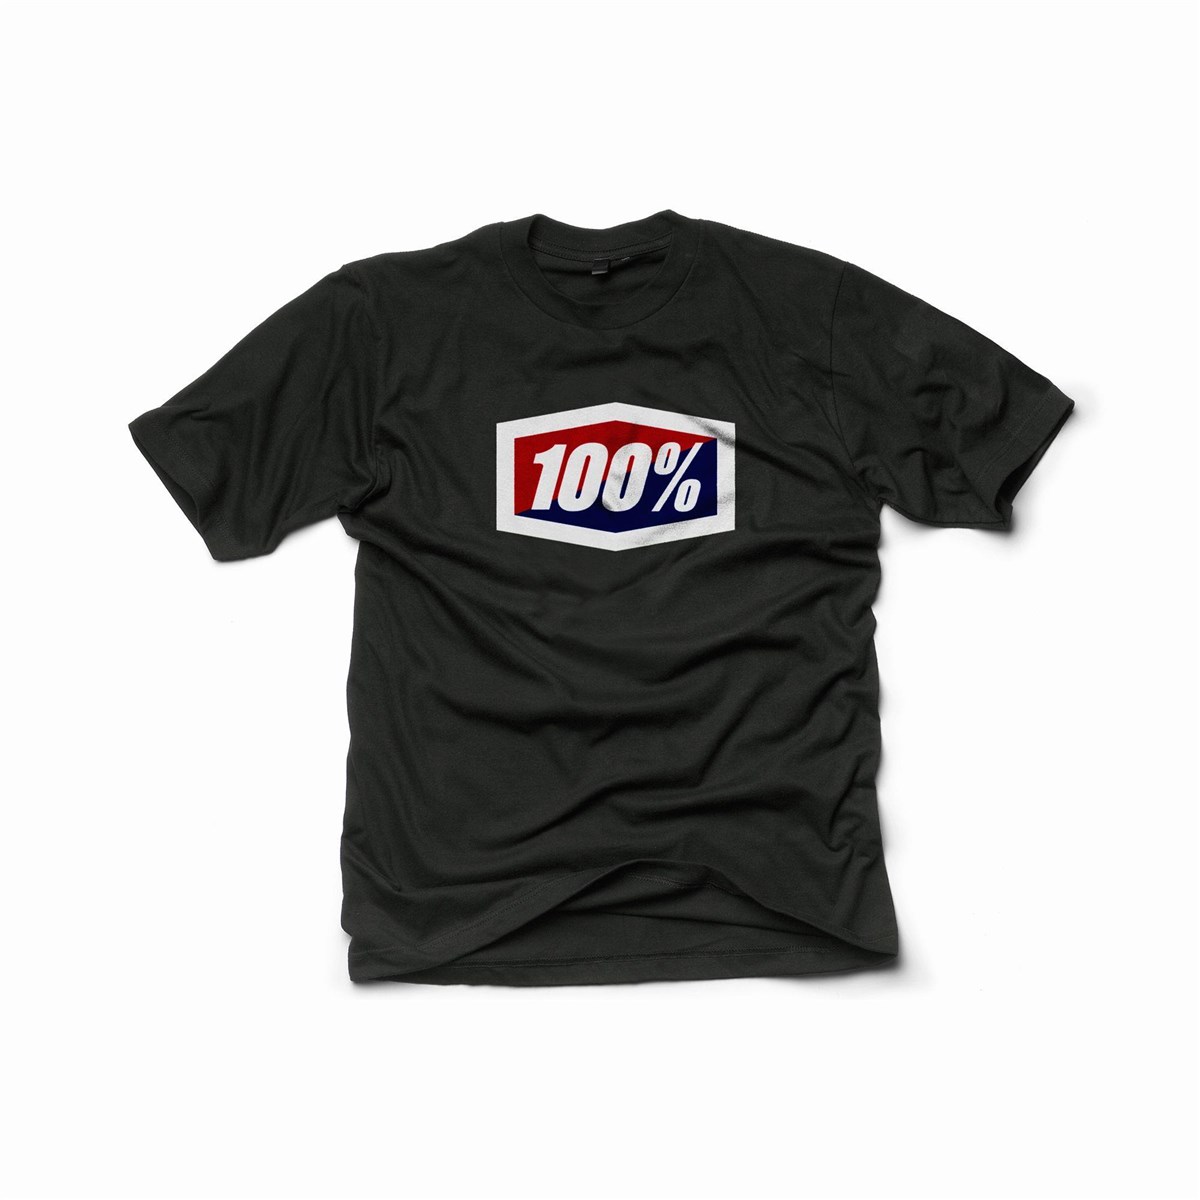 100% Official Short Sleeve T-Shirt product image